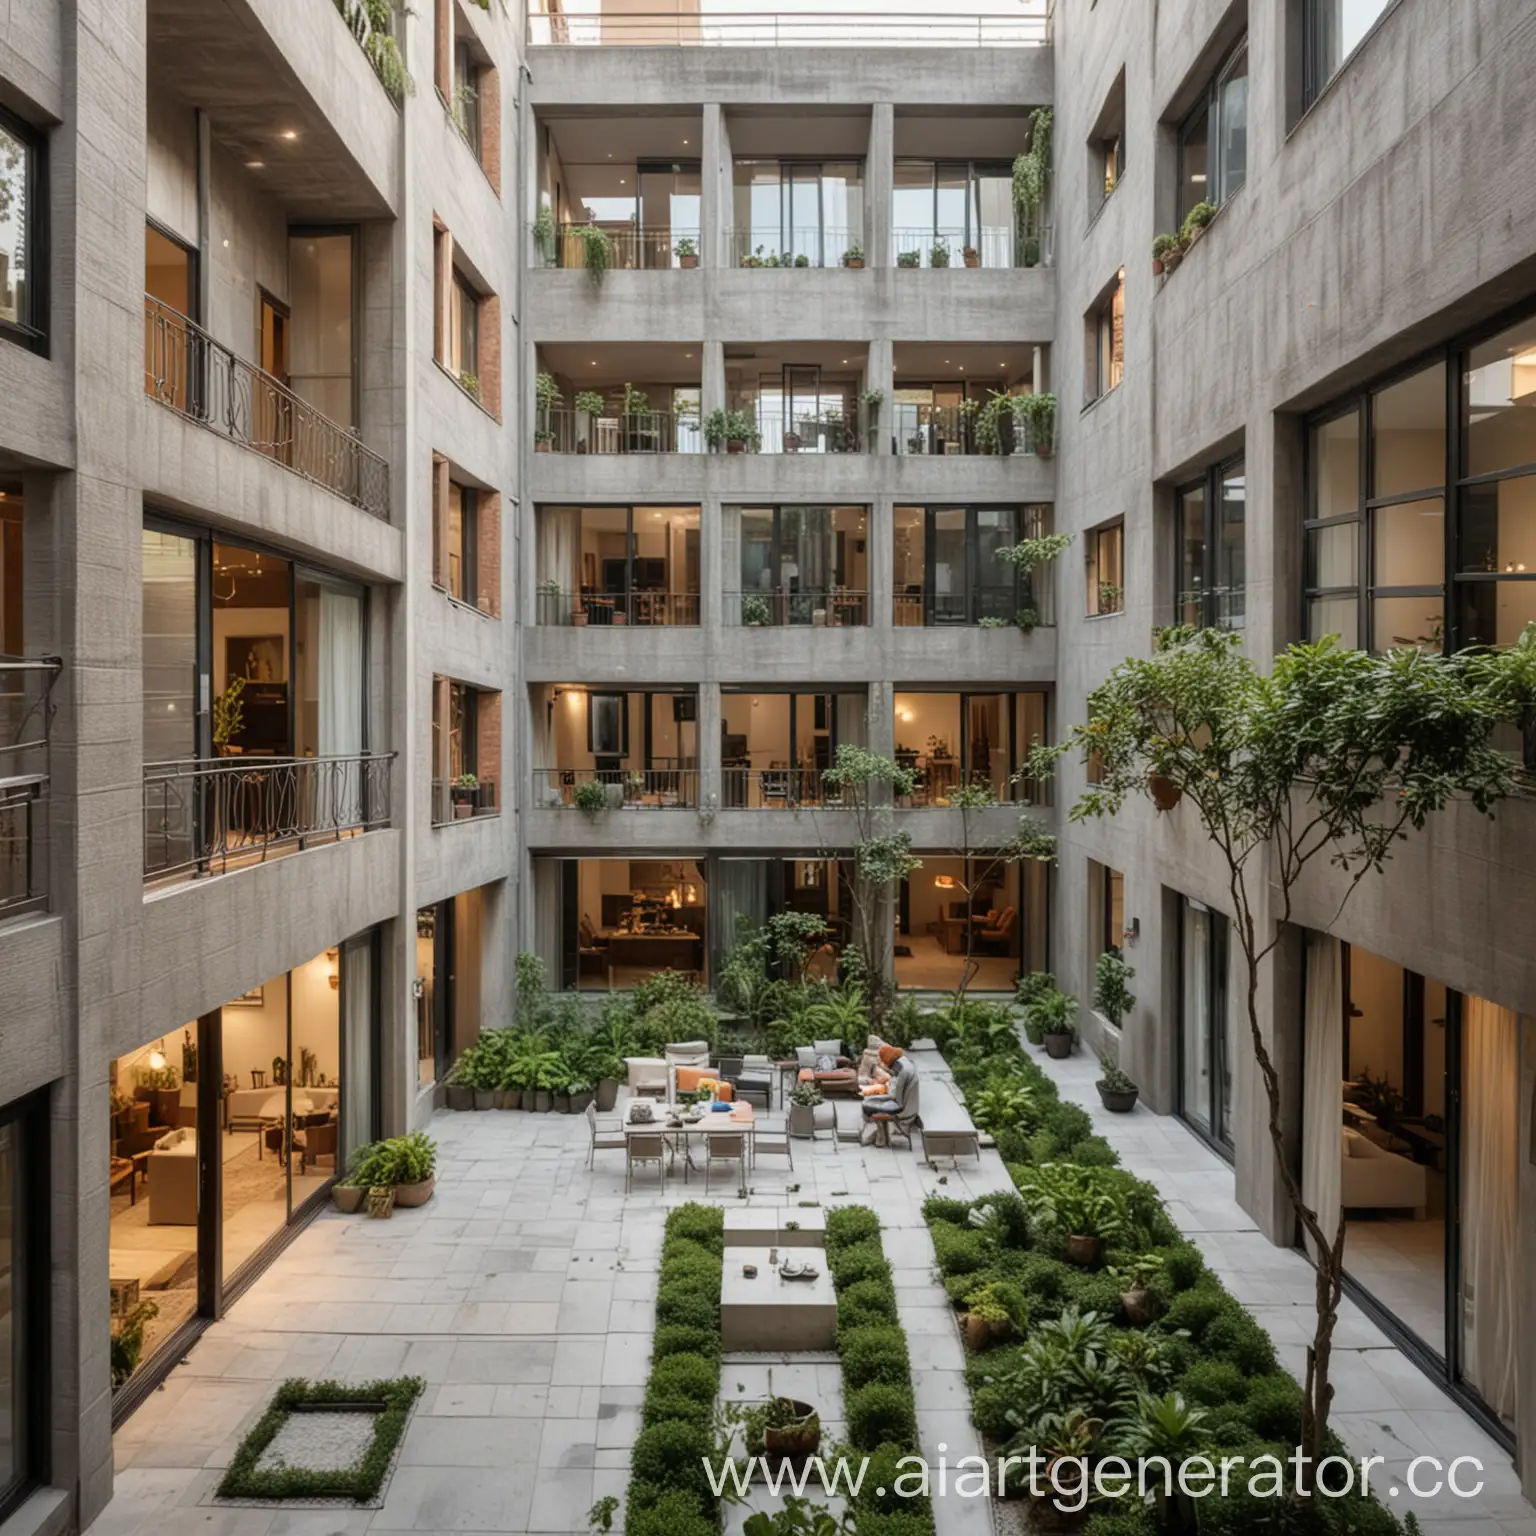 MultiStorey-House-Courtyard-Tranquil-Urban-Oasis